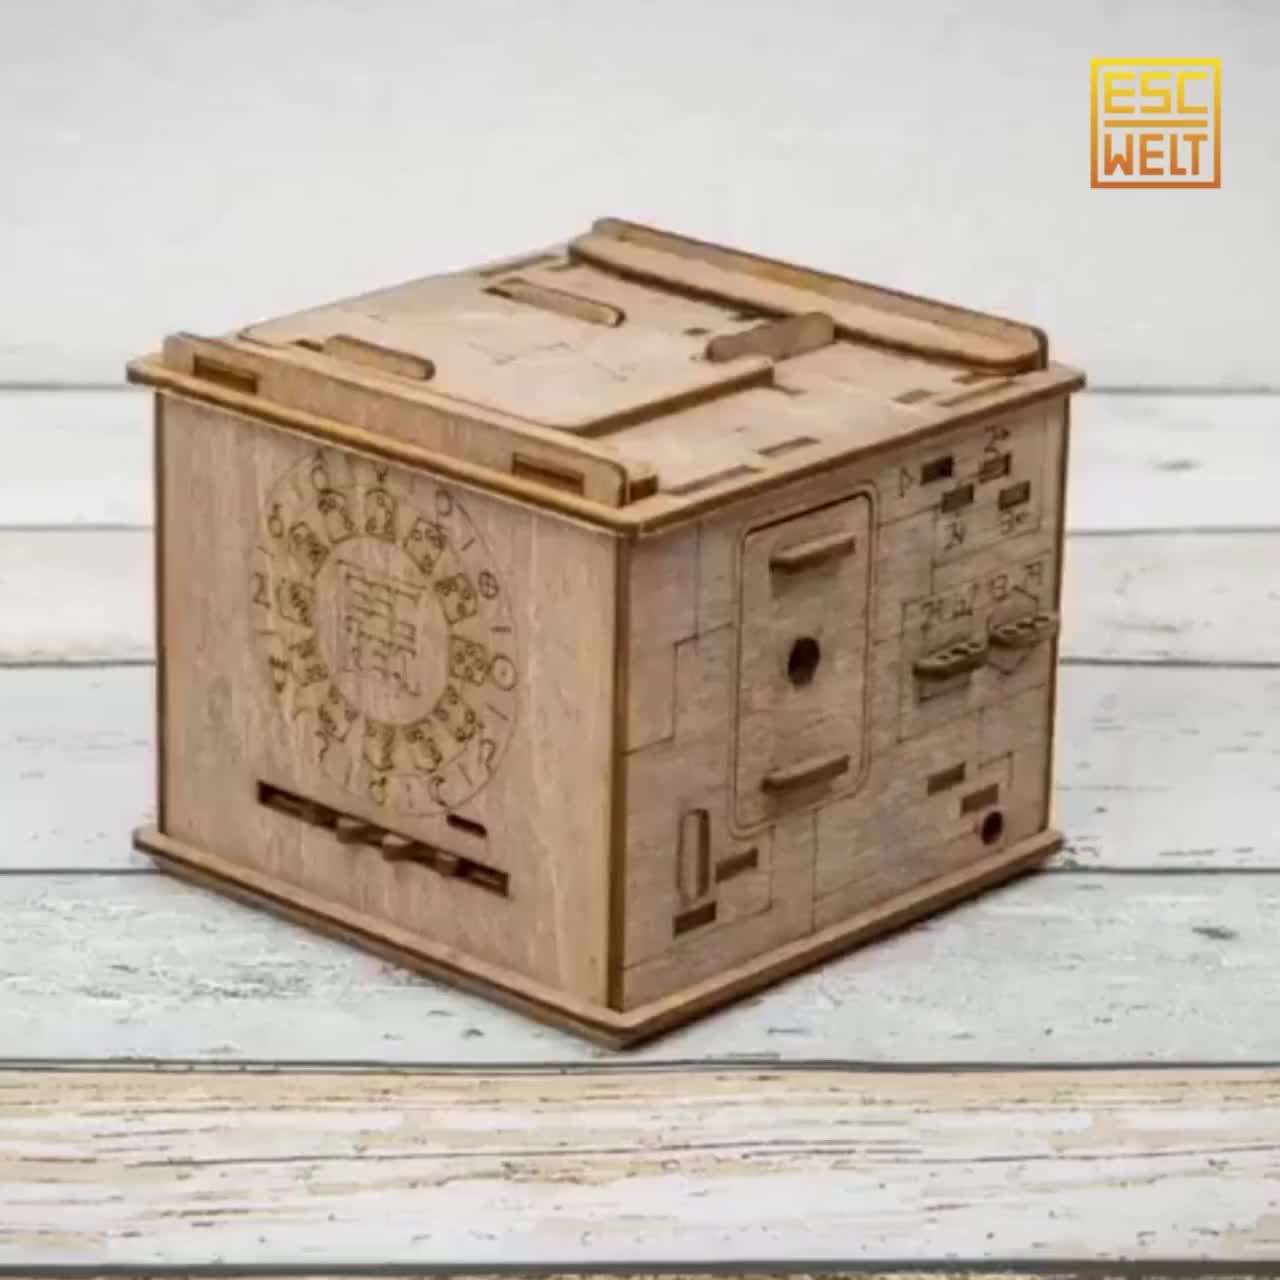 Buy 3D Puzzle Orbital Box - 190,60﷼. Best Wooden and Escape puzzles from  ESC WELT